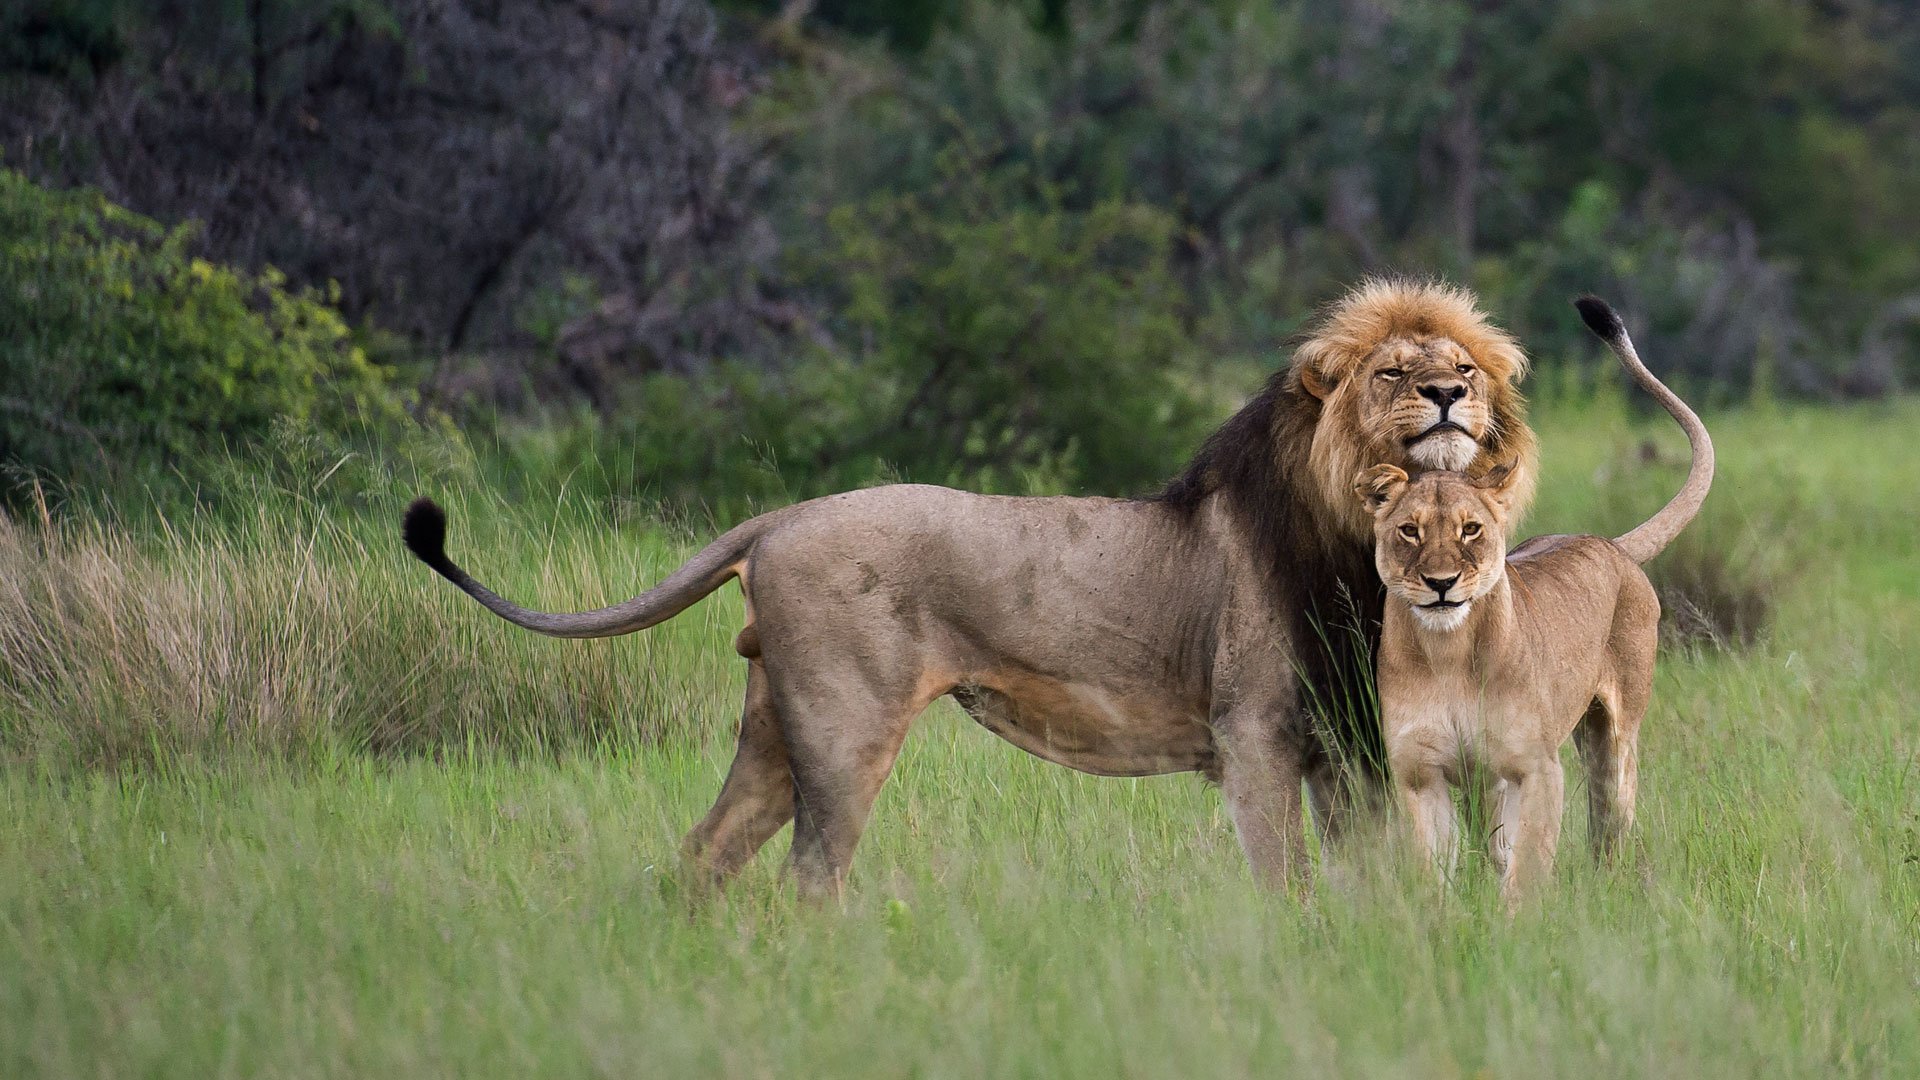 Lion tracking experience in Queen Elizabeth national park